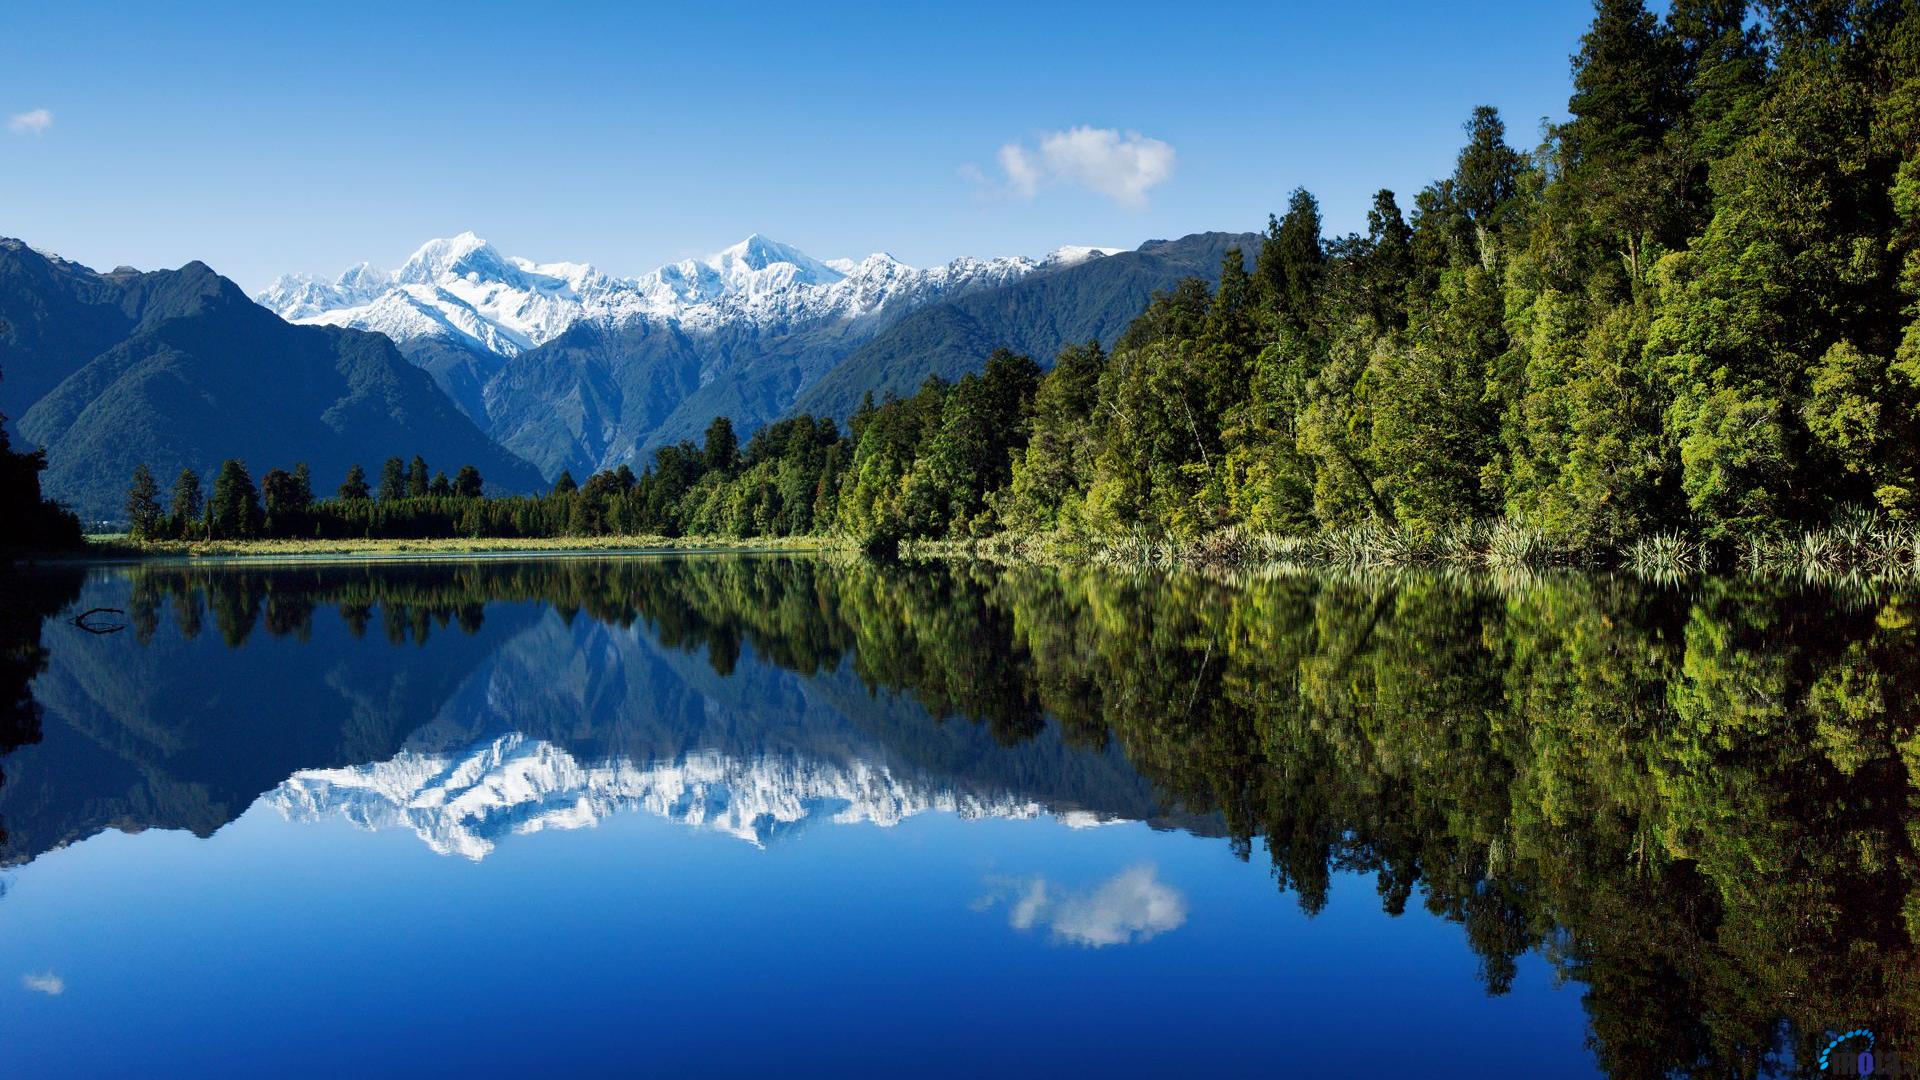 Download Wallpaper Mountains and lake in New Zealand 1920 x 1080 HDTV